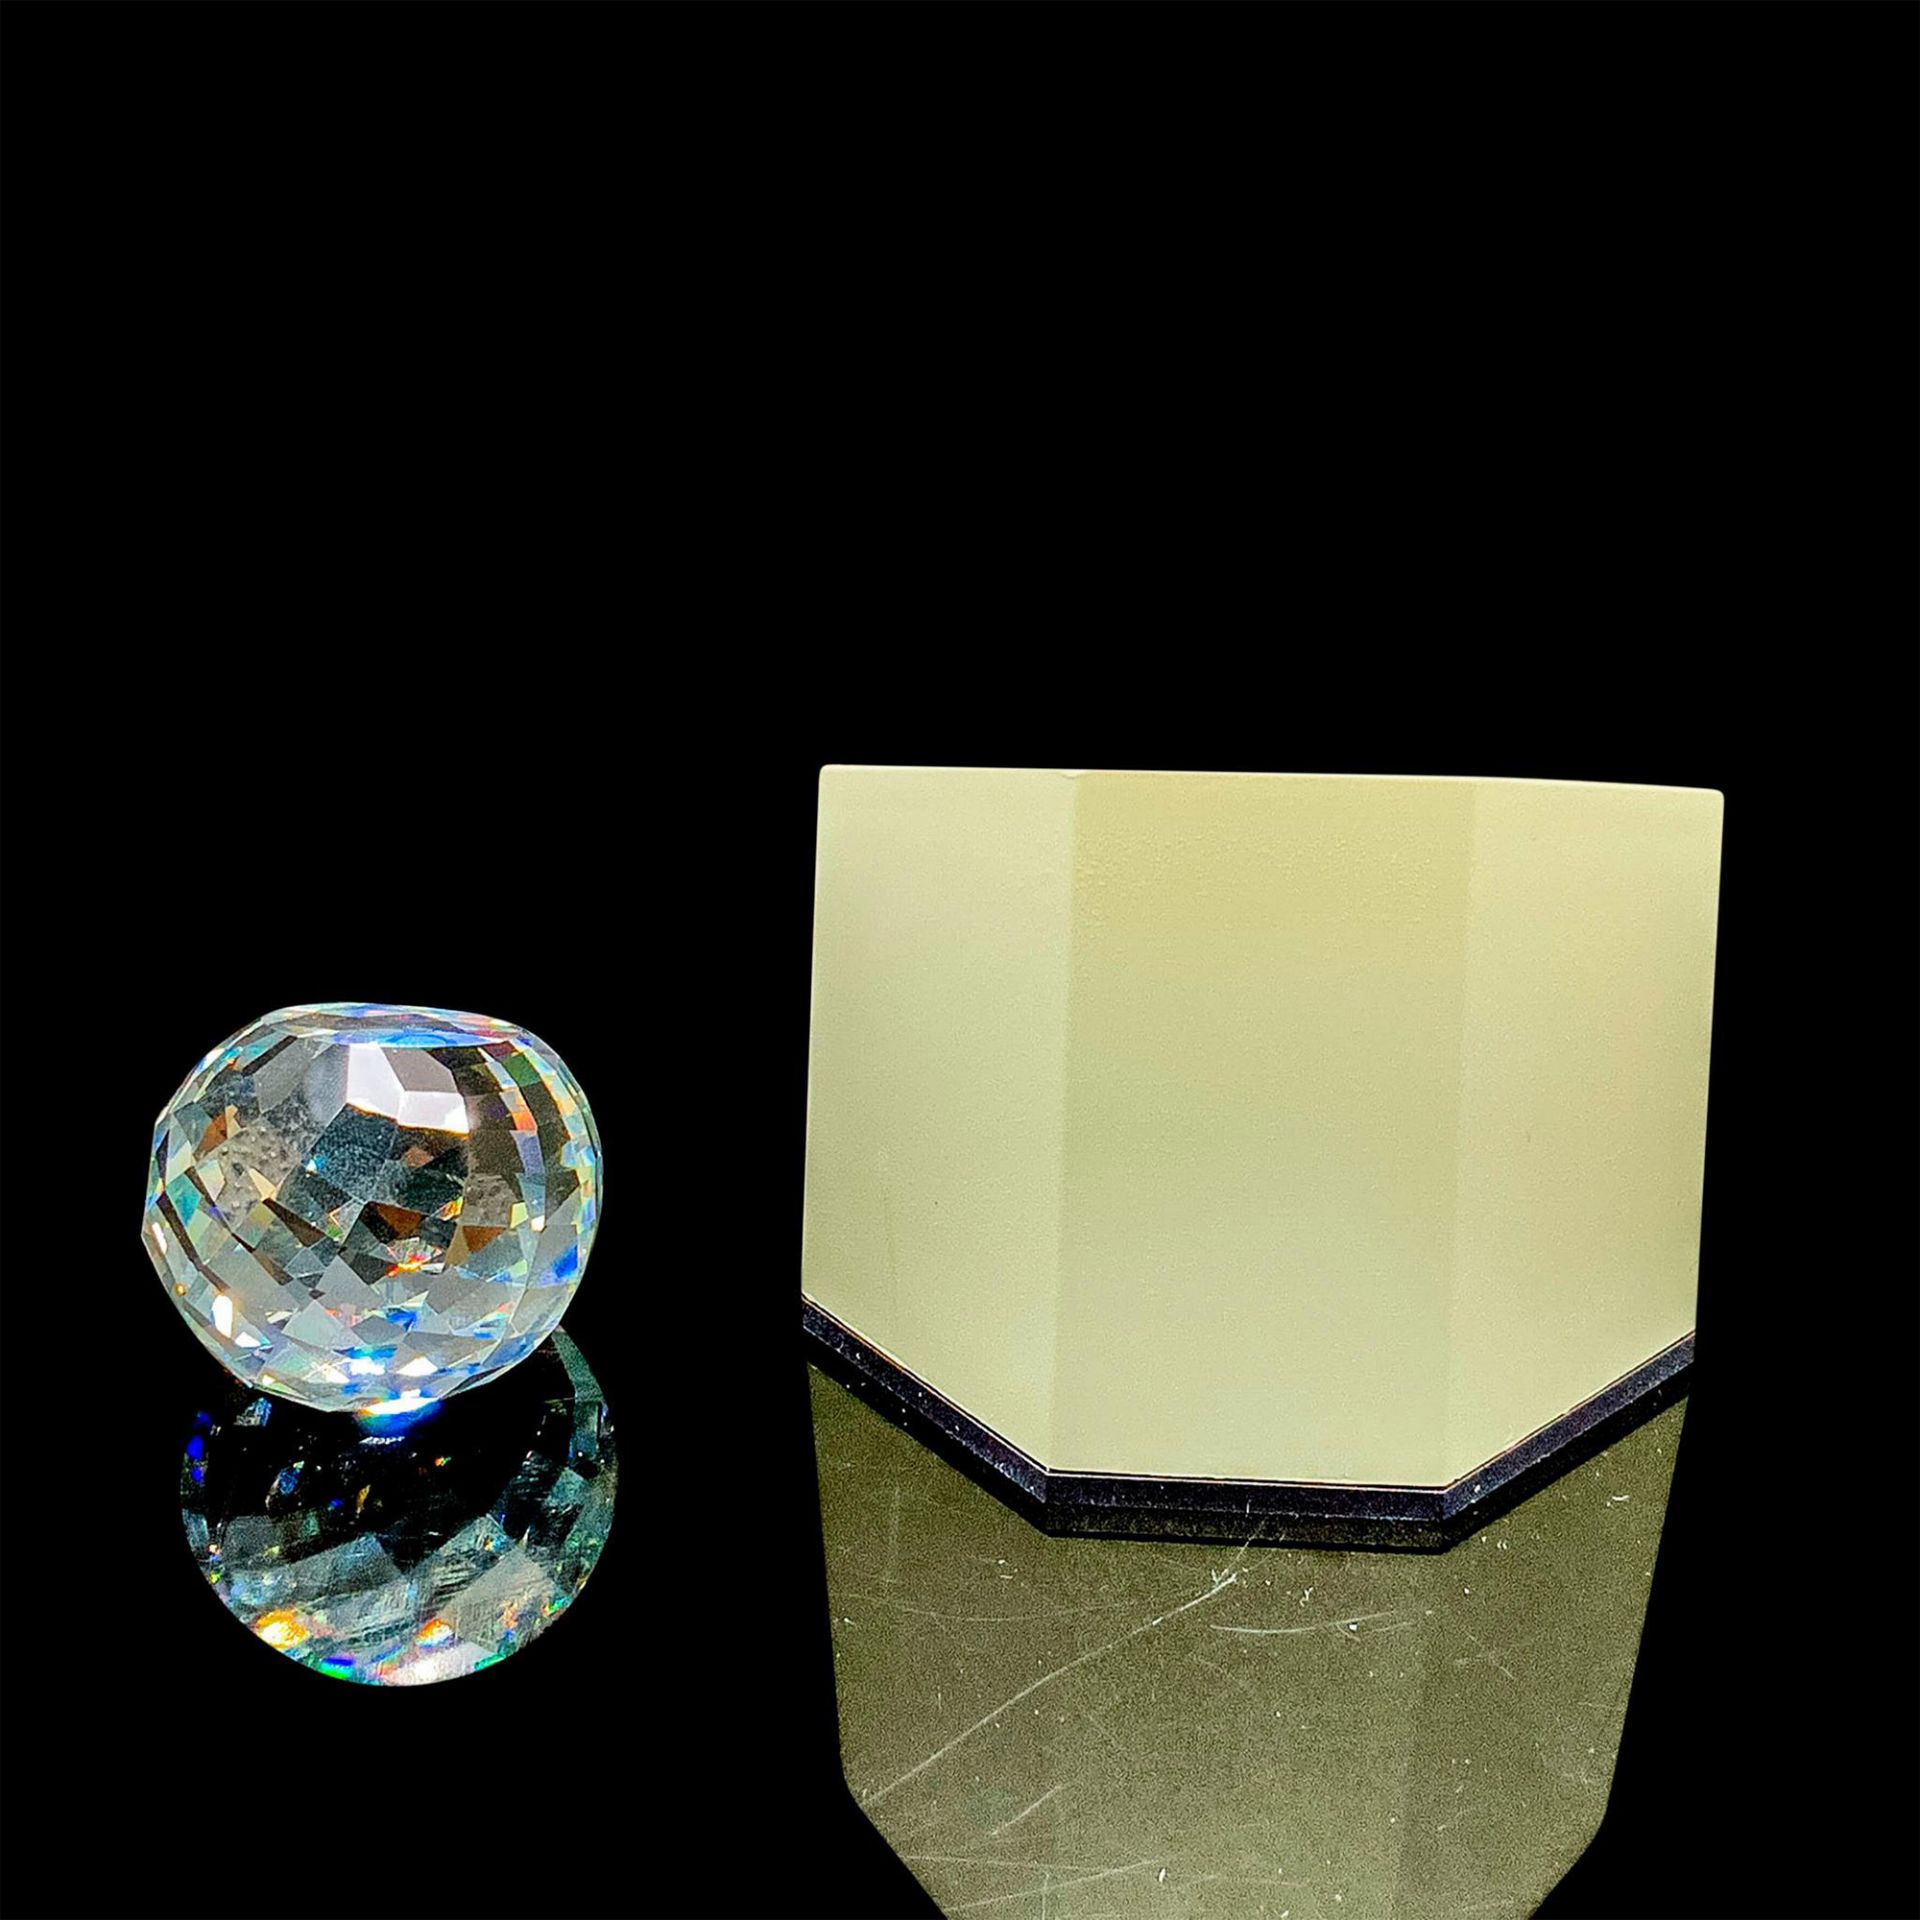 Swarovski SCS 1987 Charter Member Paperweight and Stand - Image 2 of 3